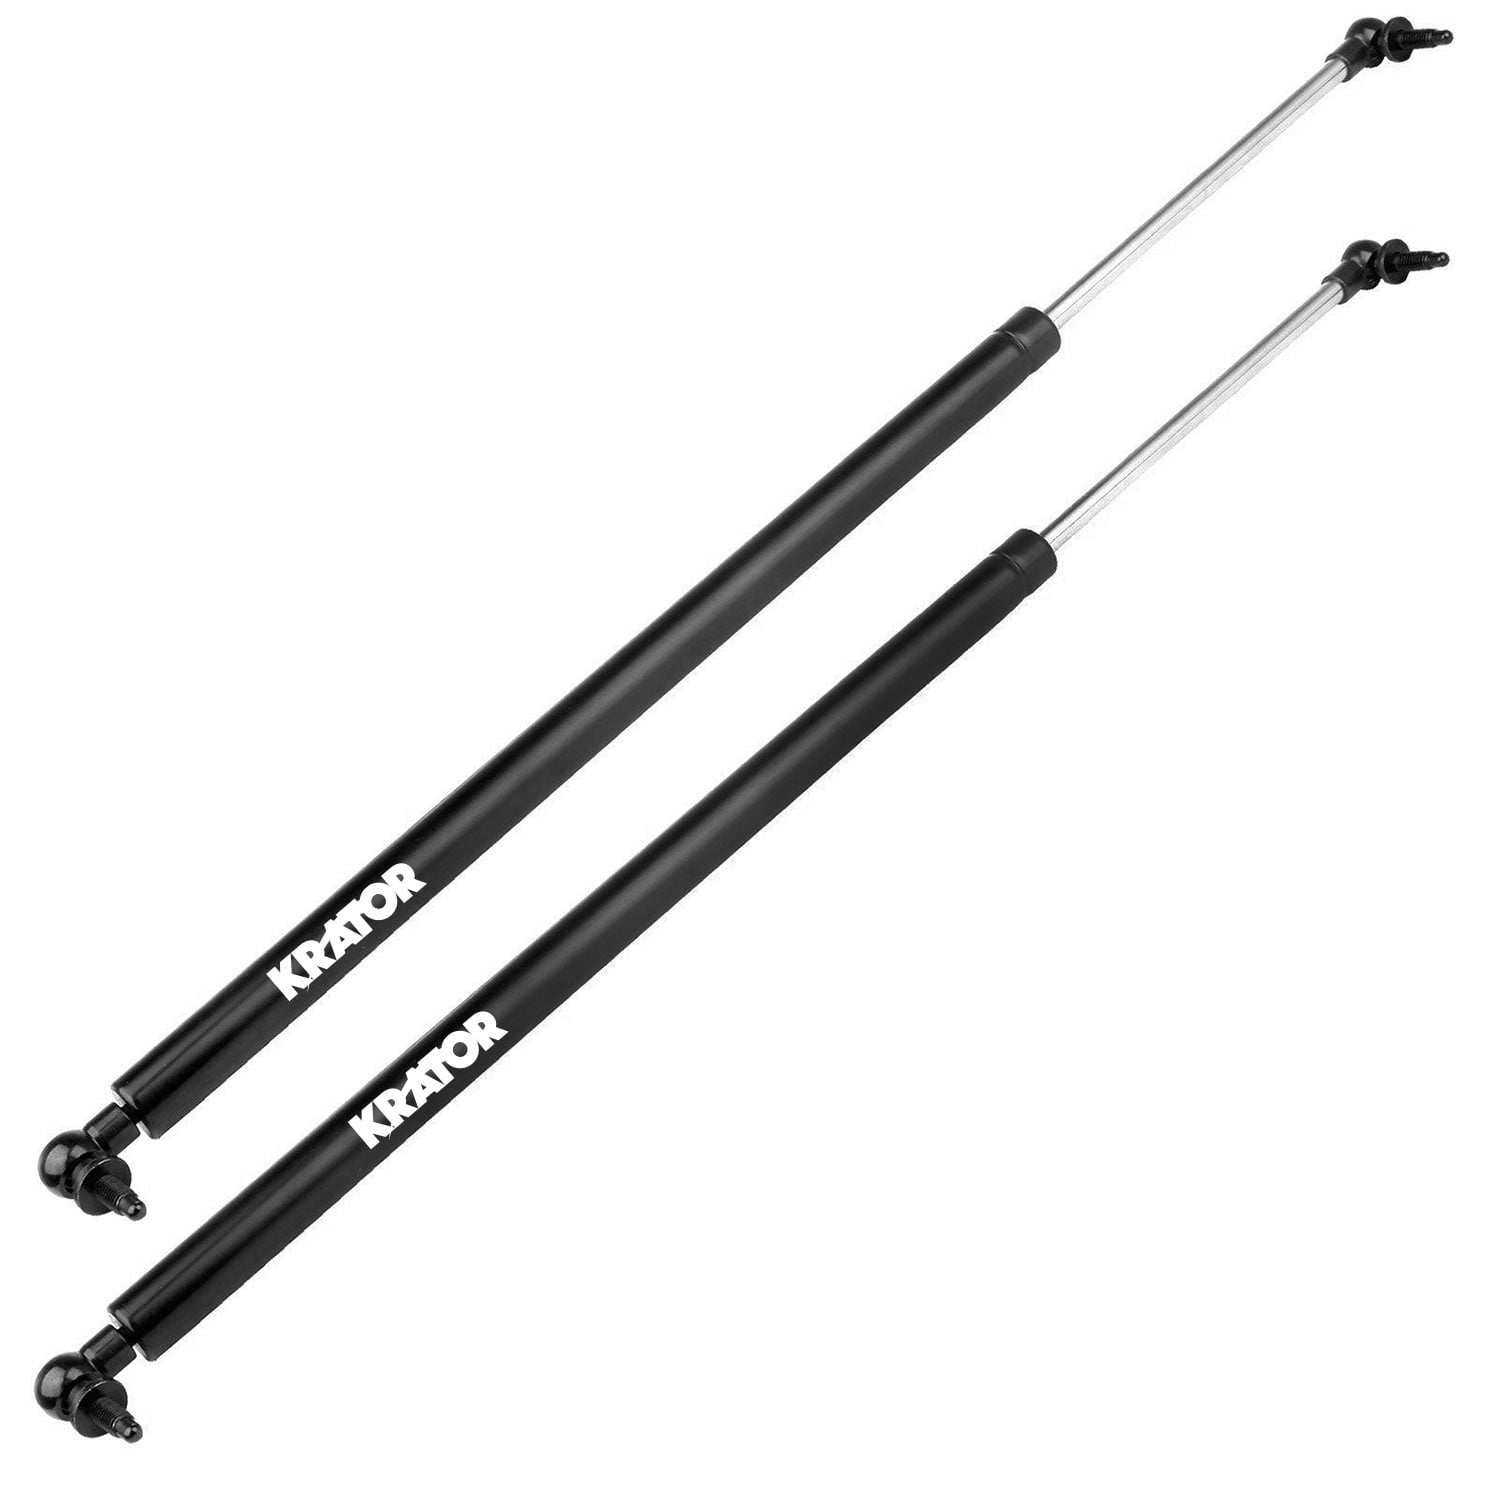 2 pc Strong Arm Liftgate Lift Supports for 2008-2016 Dodge Grand Caravan pc 